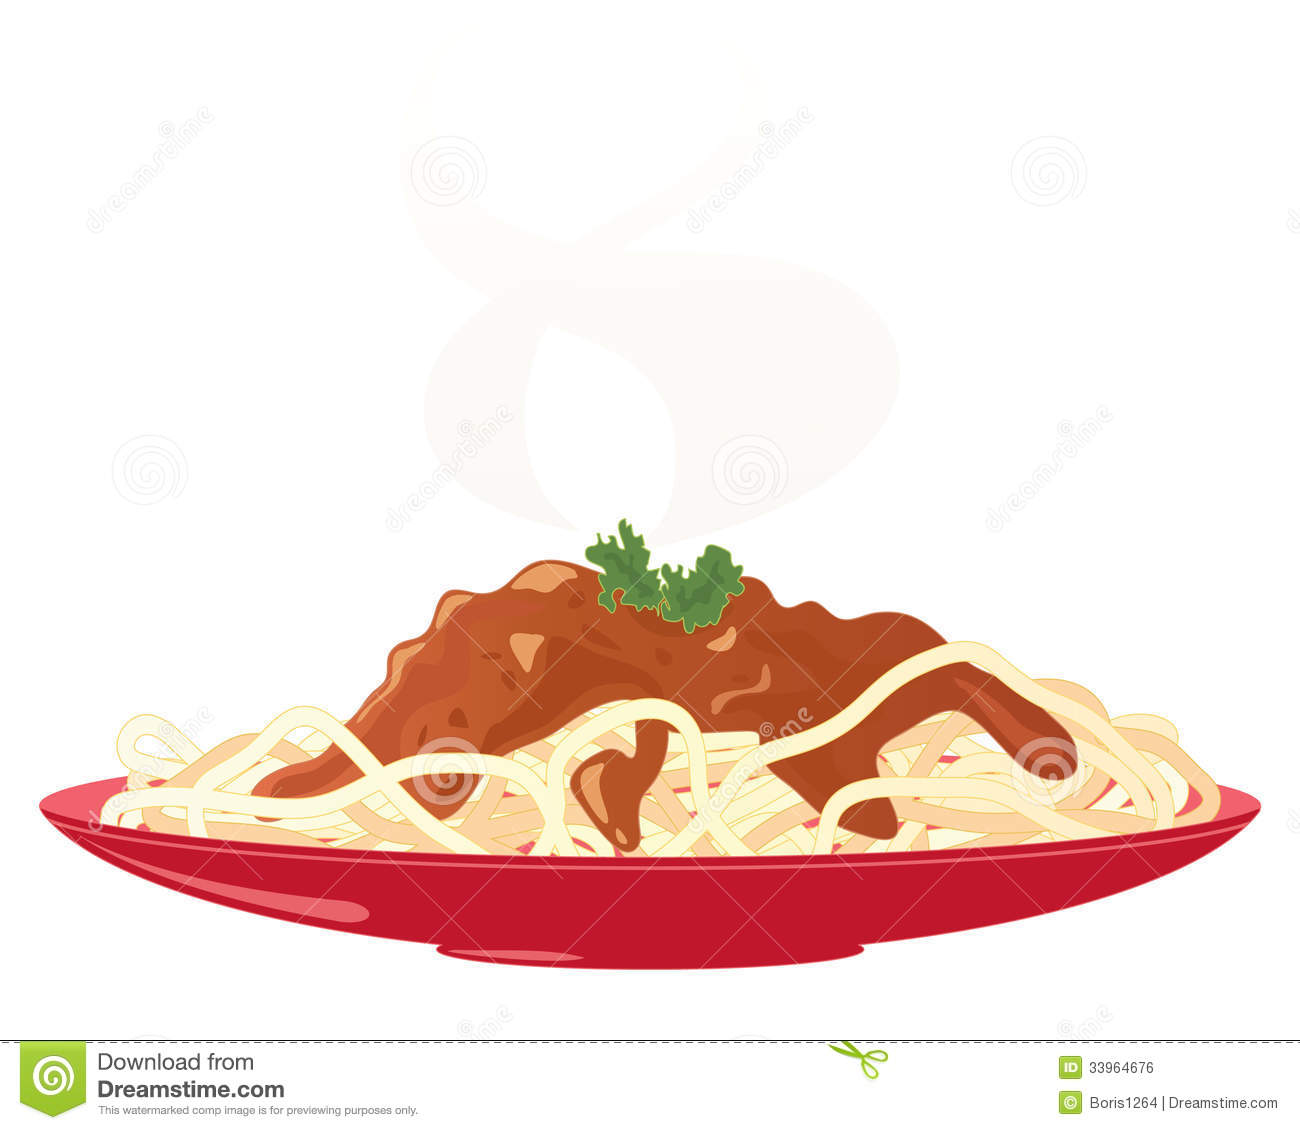 An Illustration Of A Red Plate With A Meal Of Delicious Spaghetti